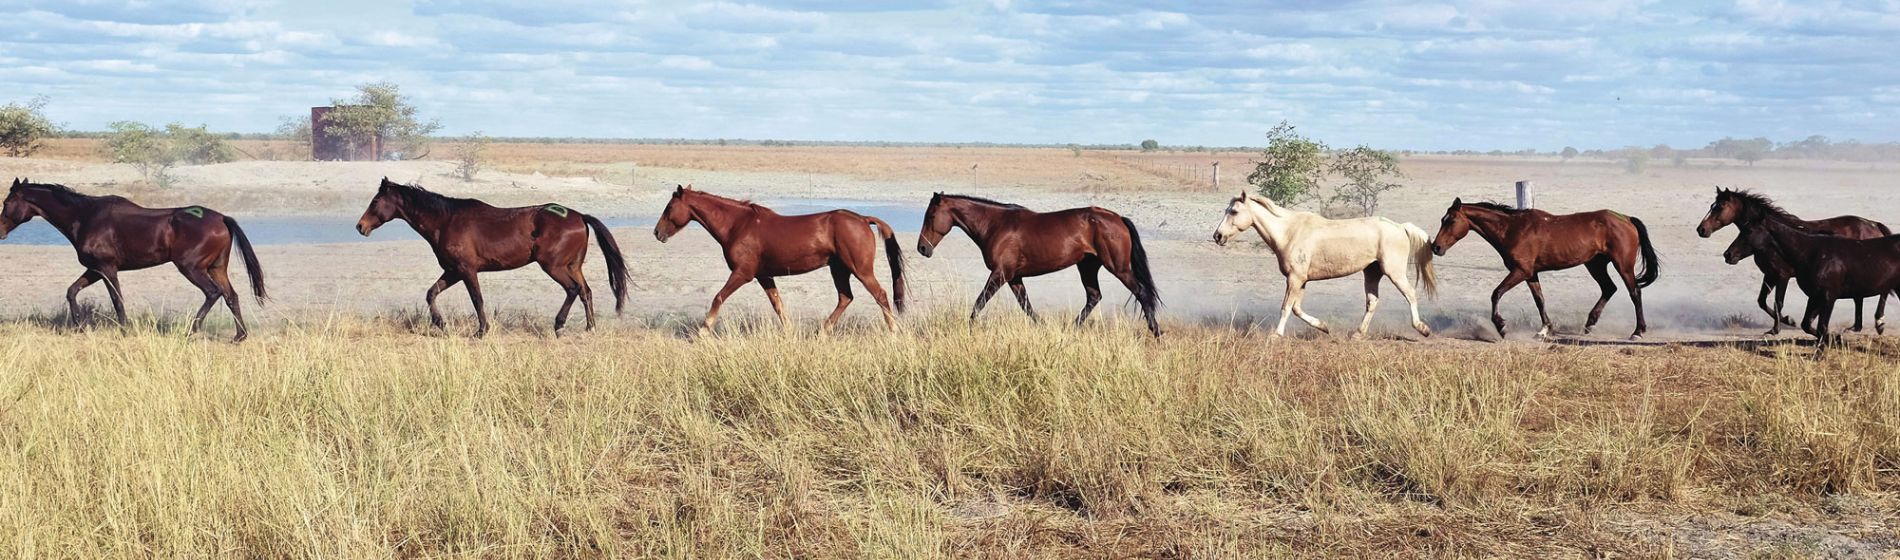 qld_outback_wild_horses_tourism_events_qld.jpg